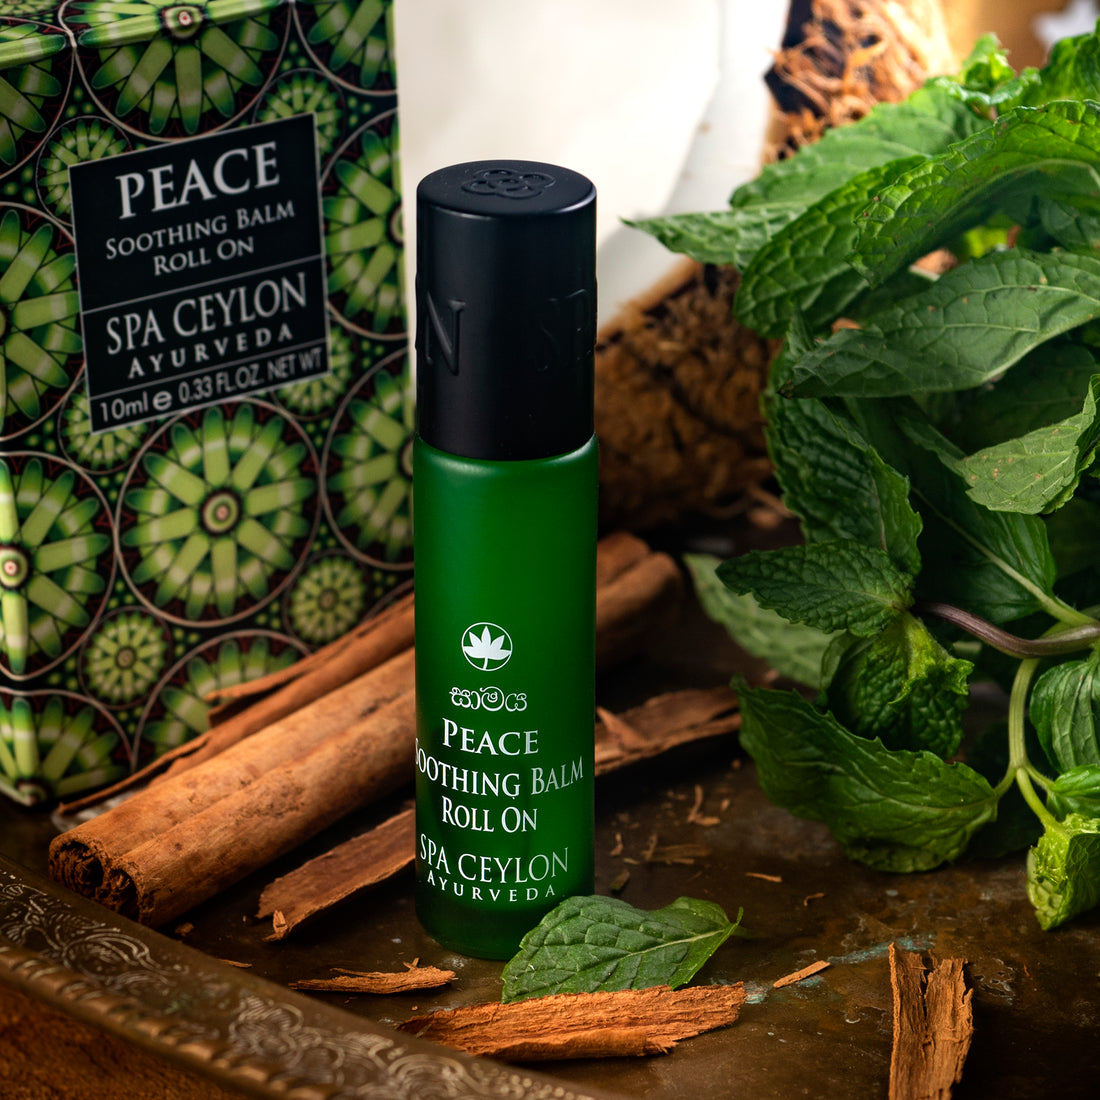 Peace - Soothing Balm Roll On